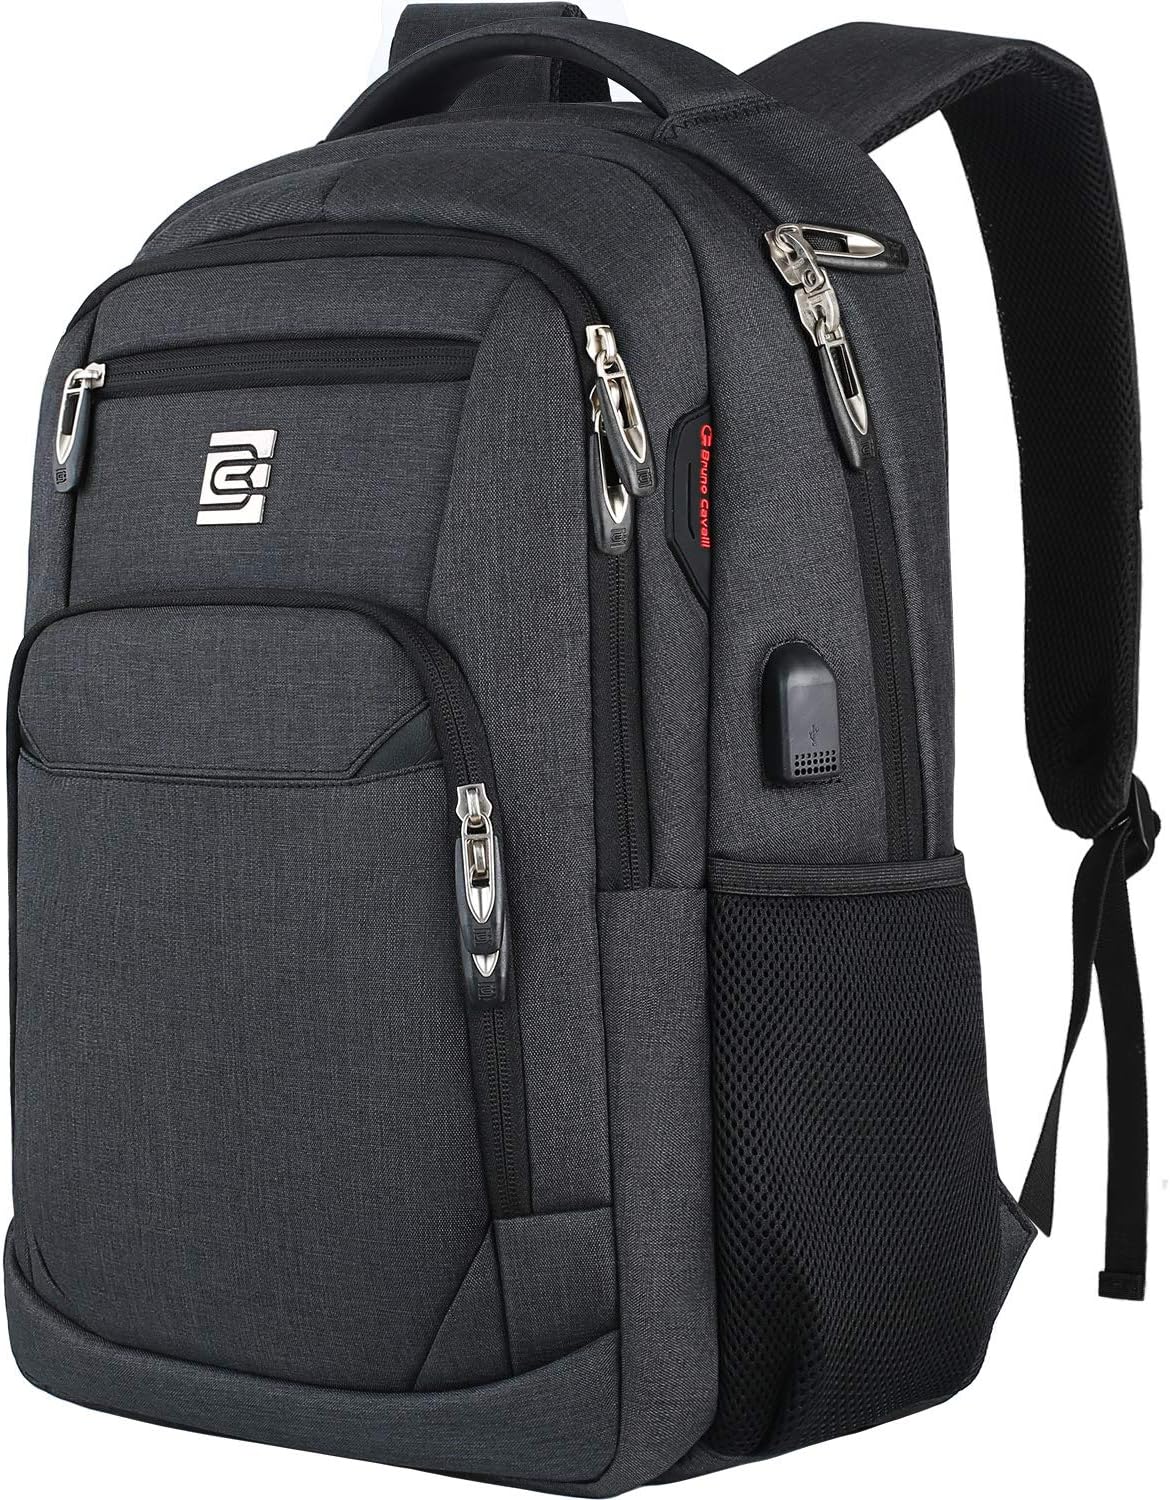 15 inch laptop backpack review